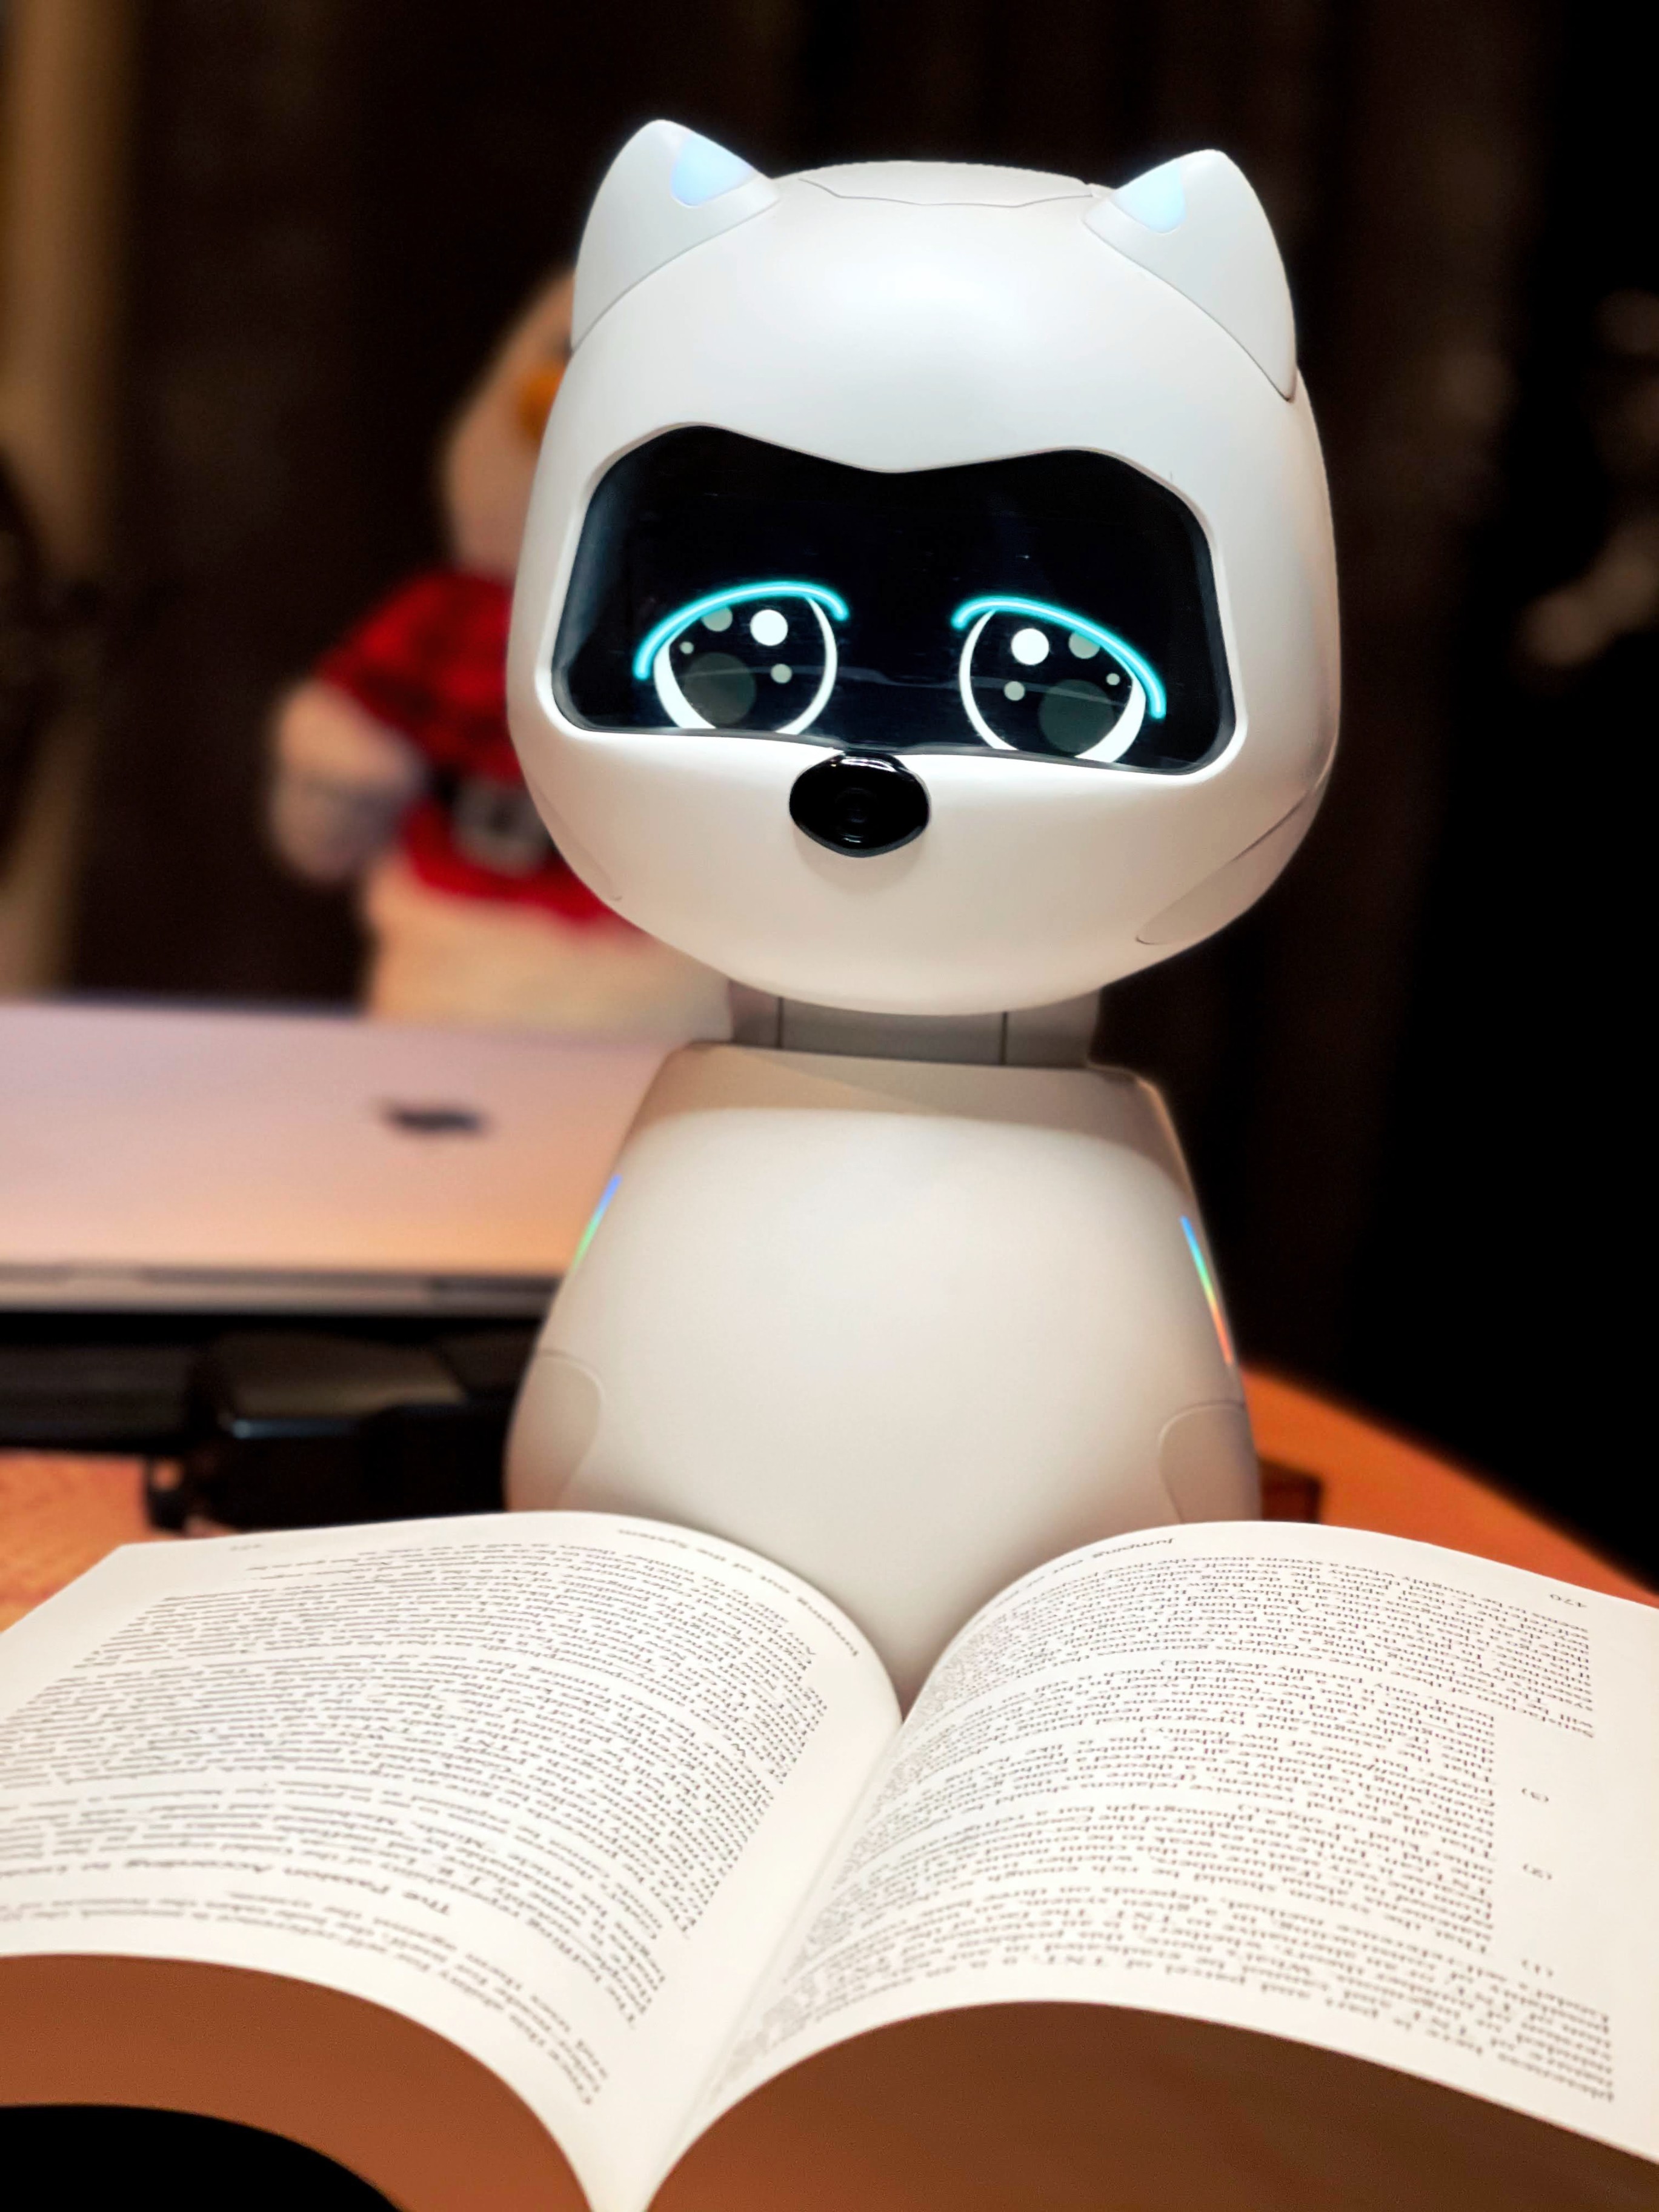 Kiki - A Cute Robot that Learns from You by Zoetic AI — Kickstarter